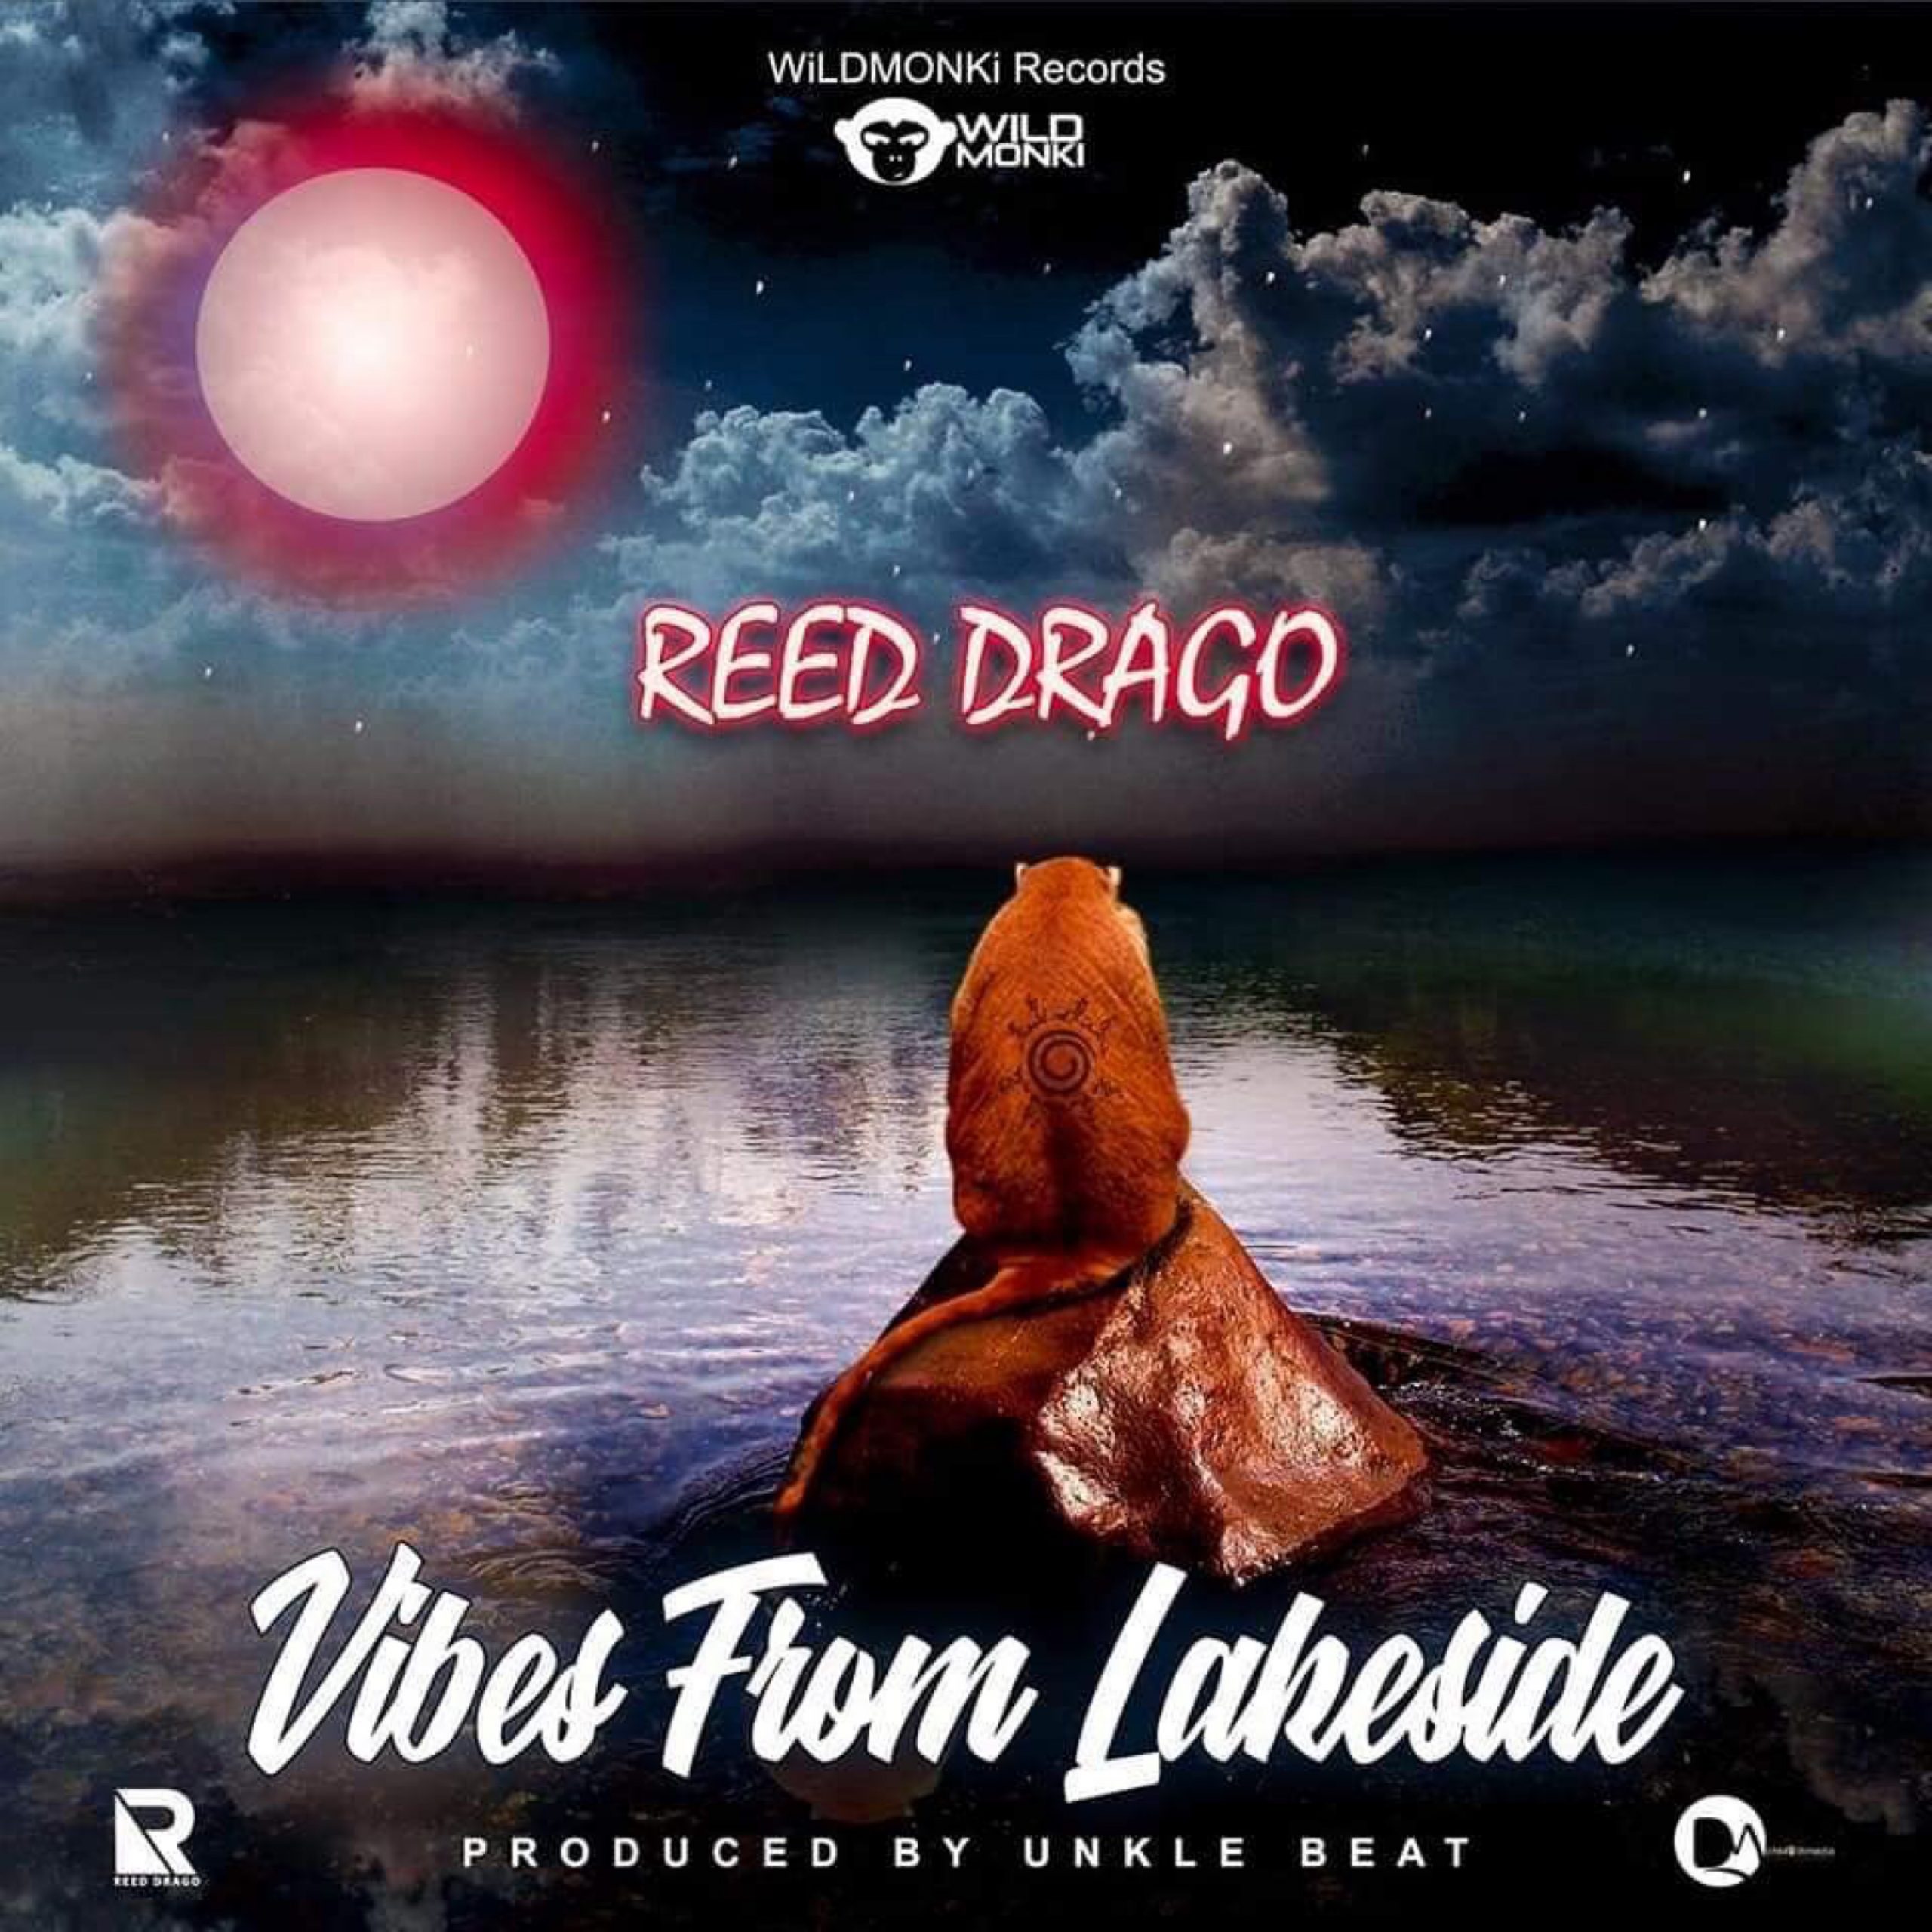 Reed Drago's debut album “Vibes from Lakeside”